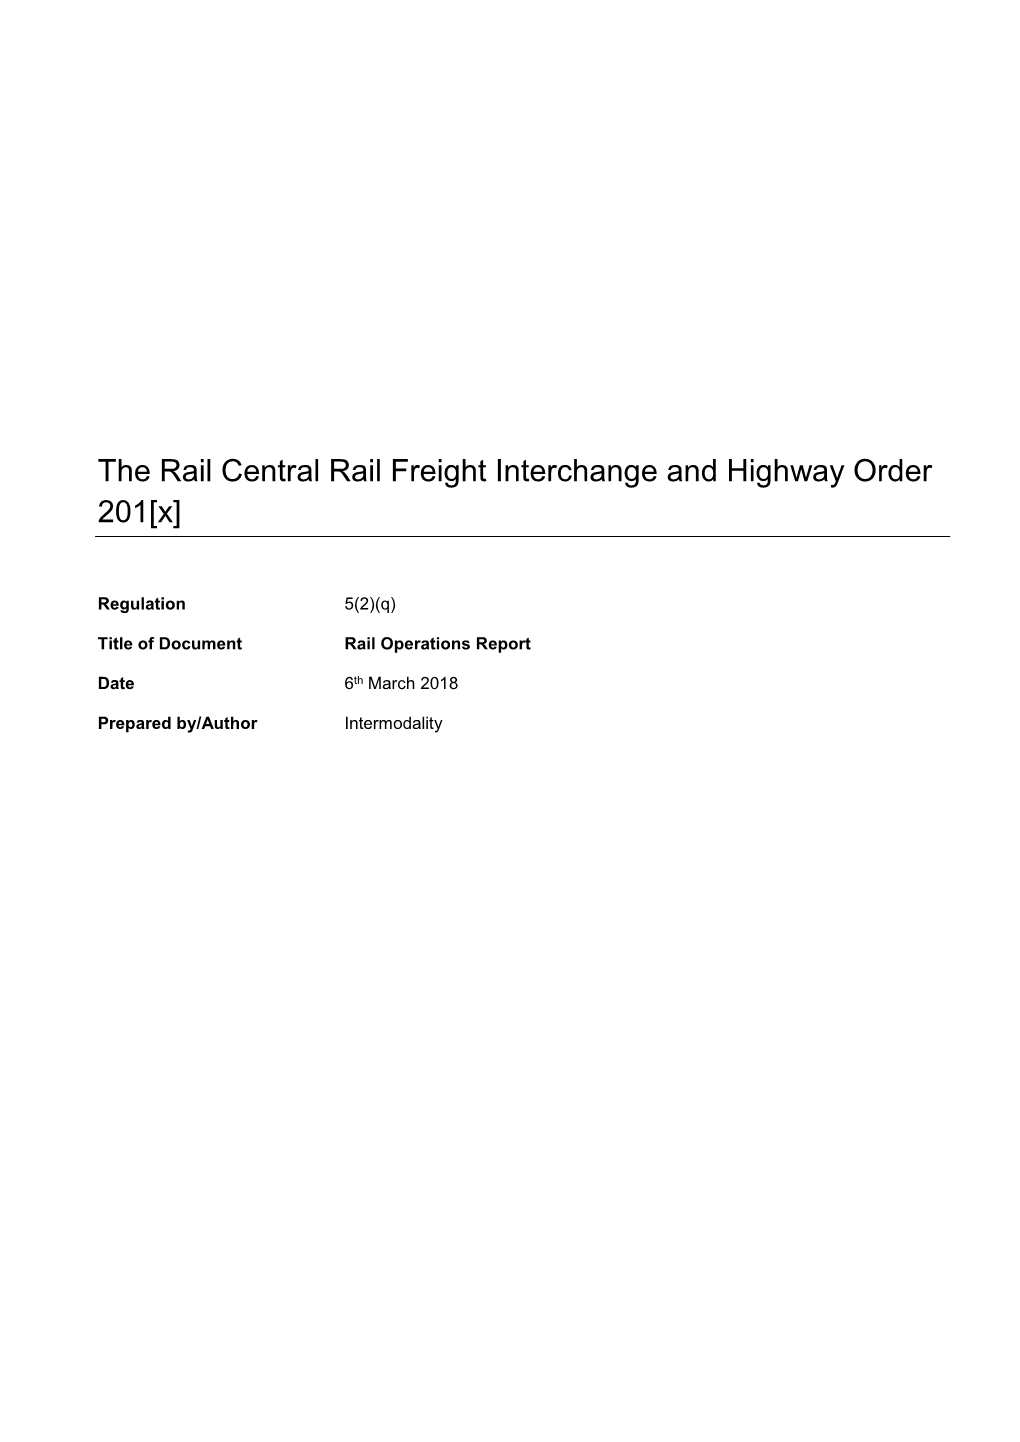 The Rail Central Rail Freight Interchange and Highway Order 201[X]